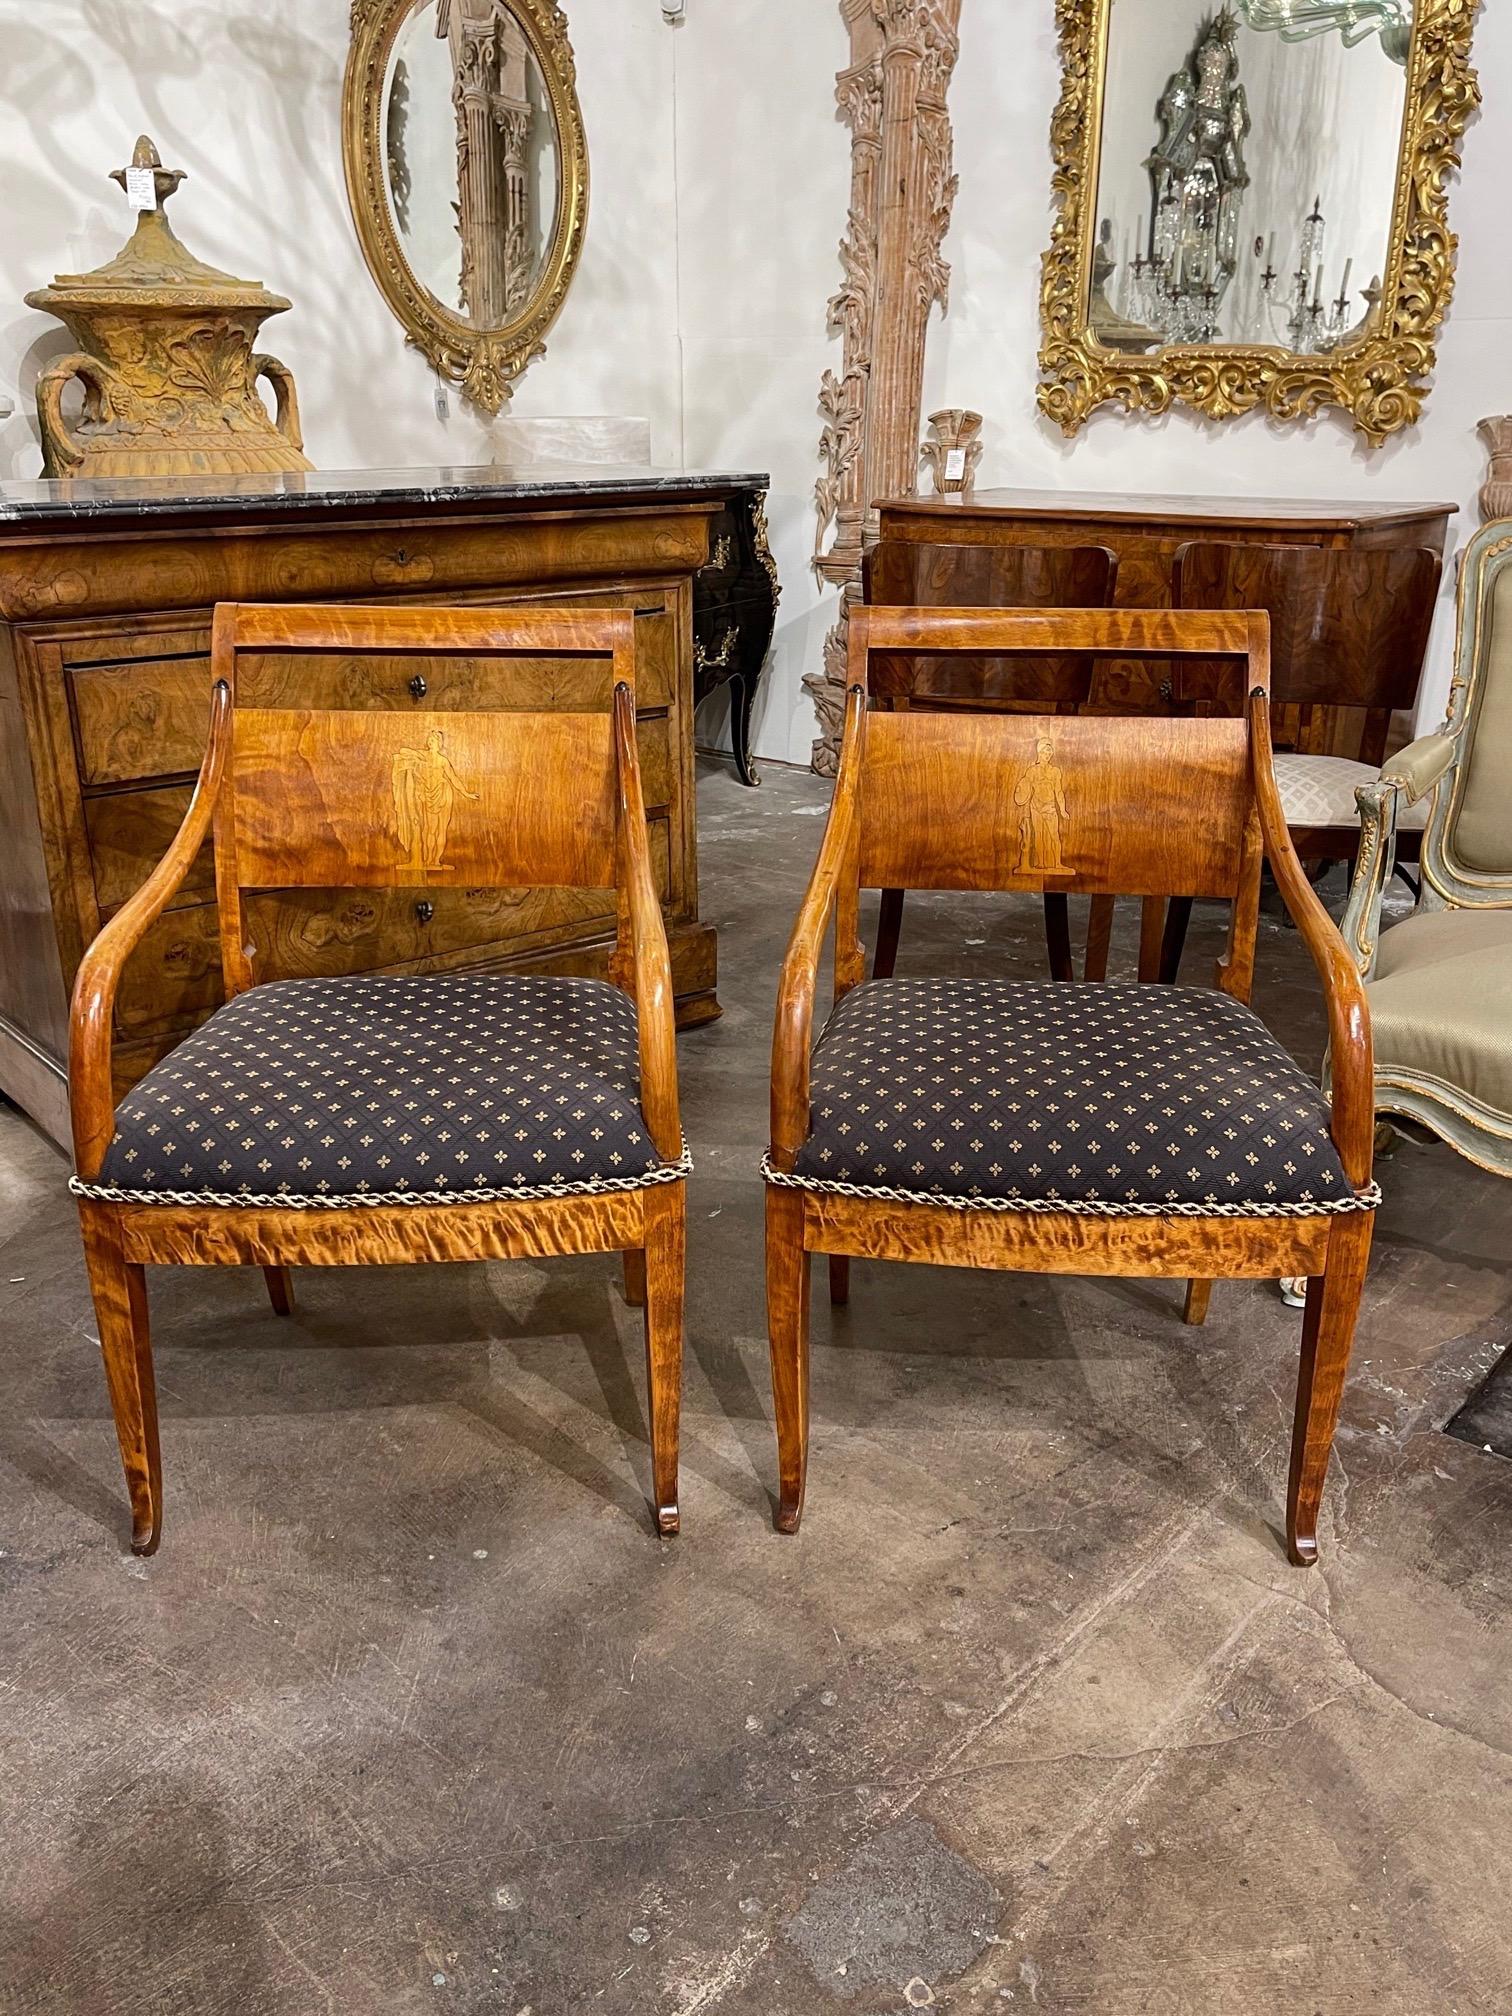 Exquisite pair of antique flame mahogany Biedermeier armchairs. There is an inlaid image of a person on each chair and they are upholstered in a pretty patterned fabric. So unique and exceptional quality!